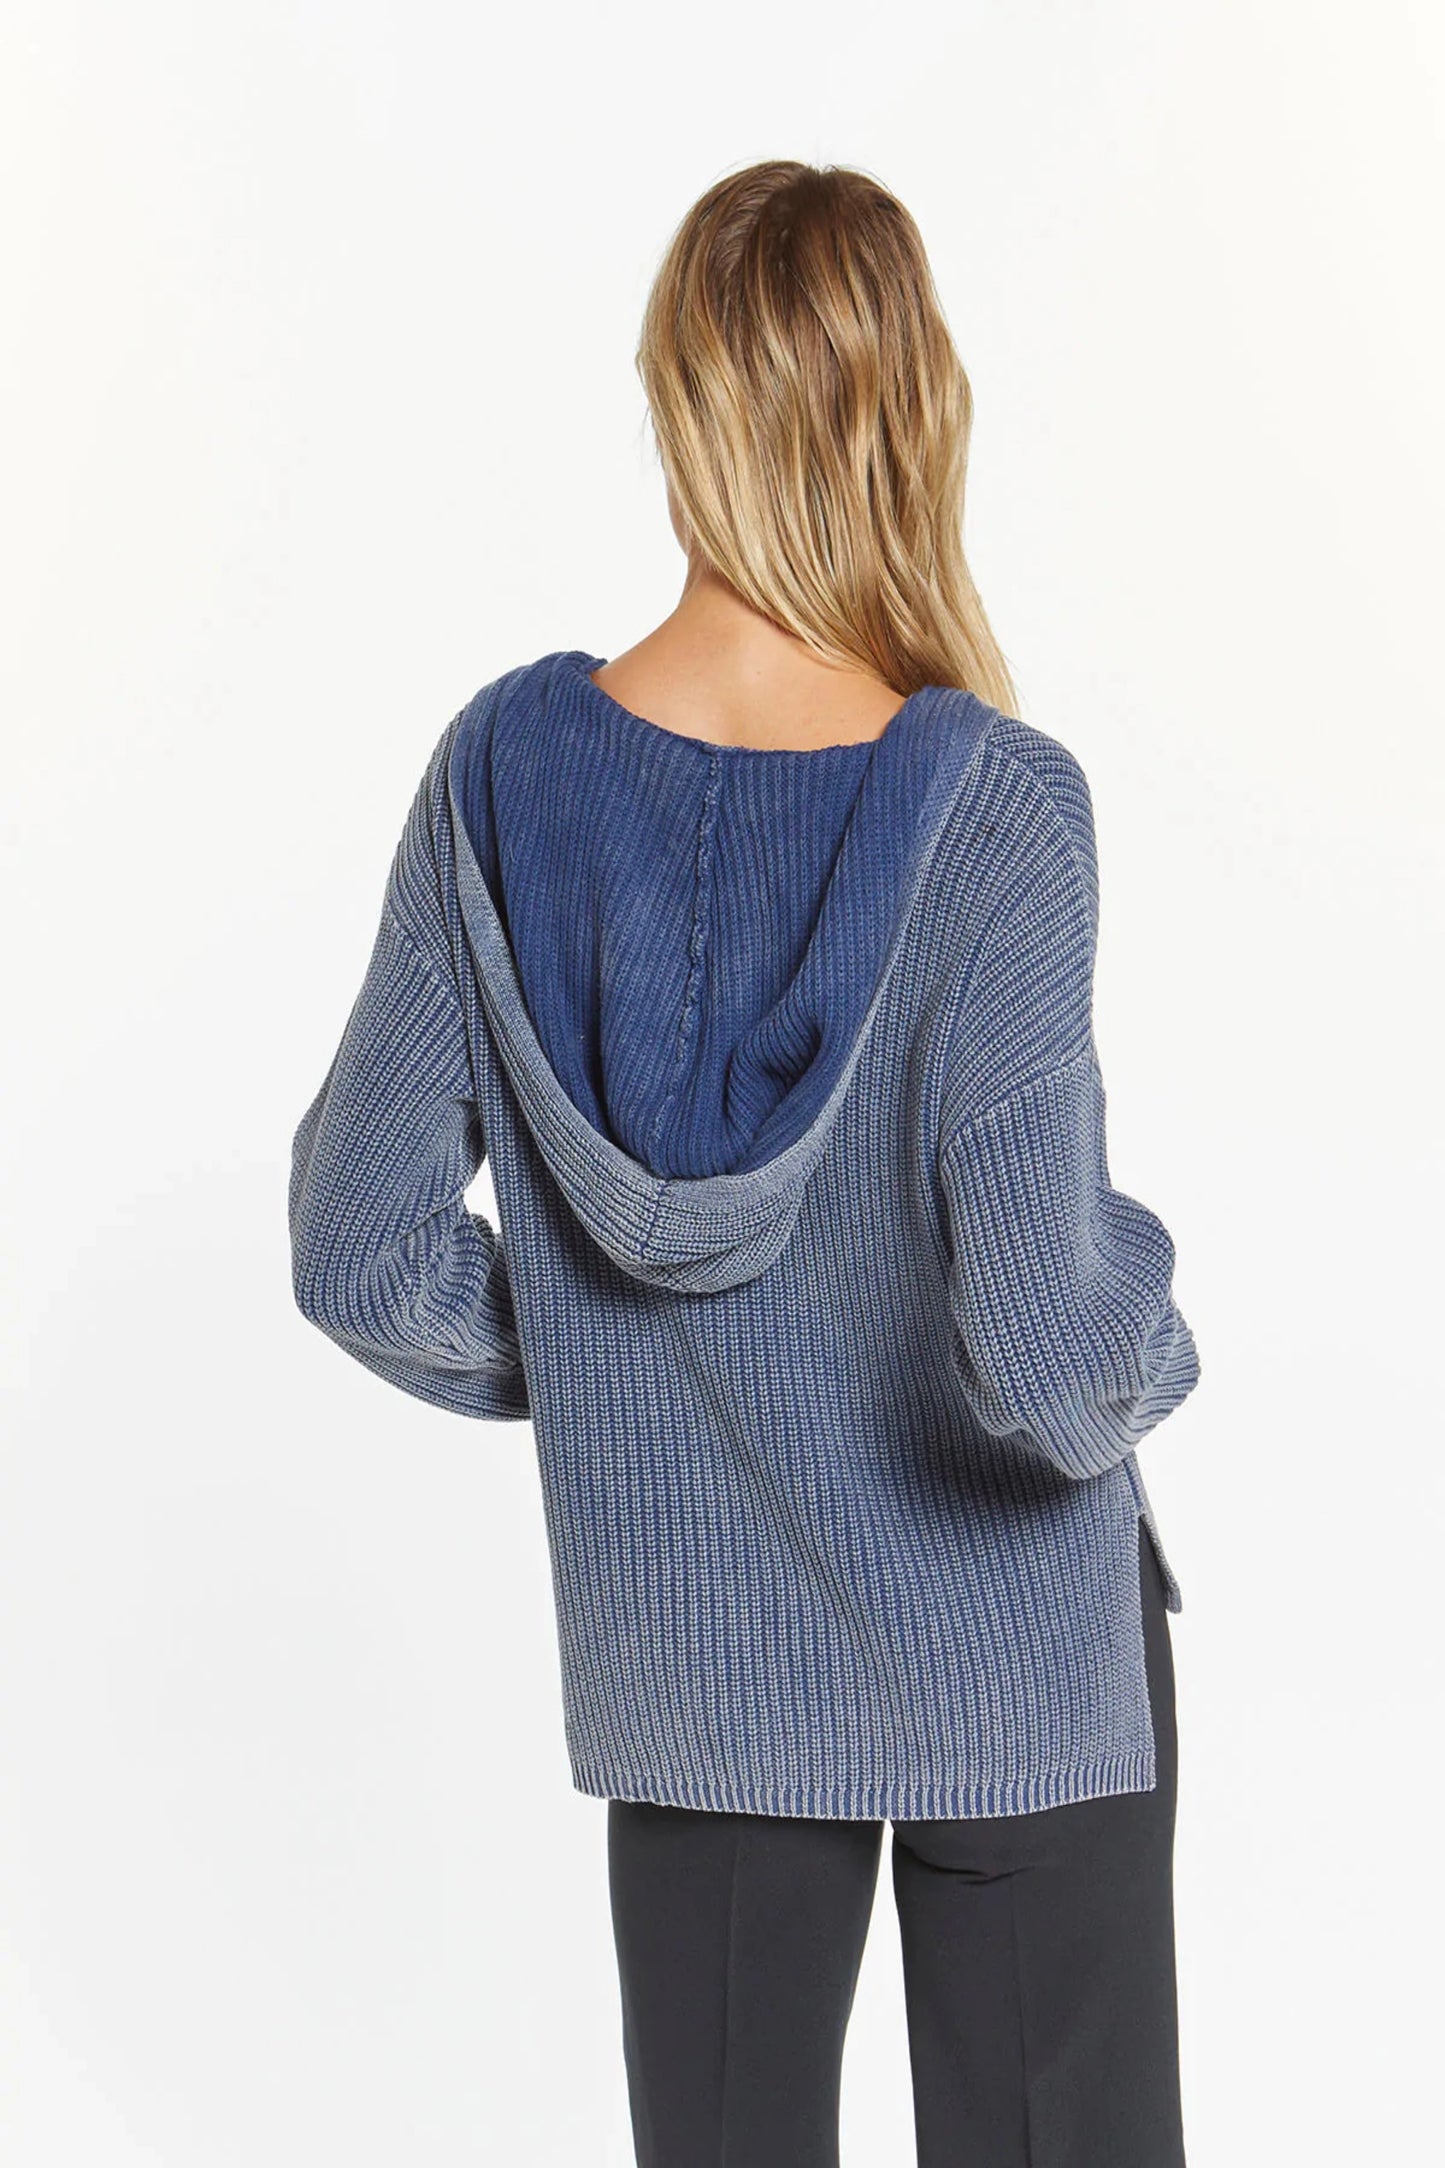 Frosted Blue Hooded Sweater